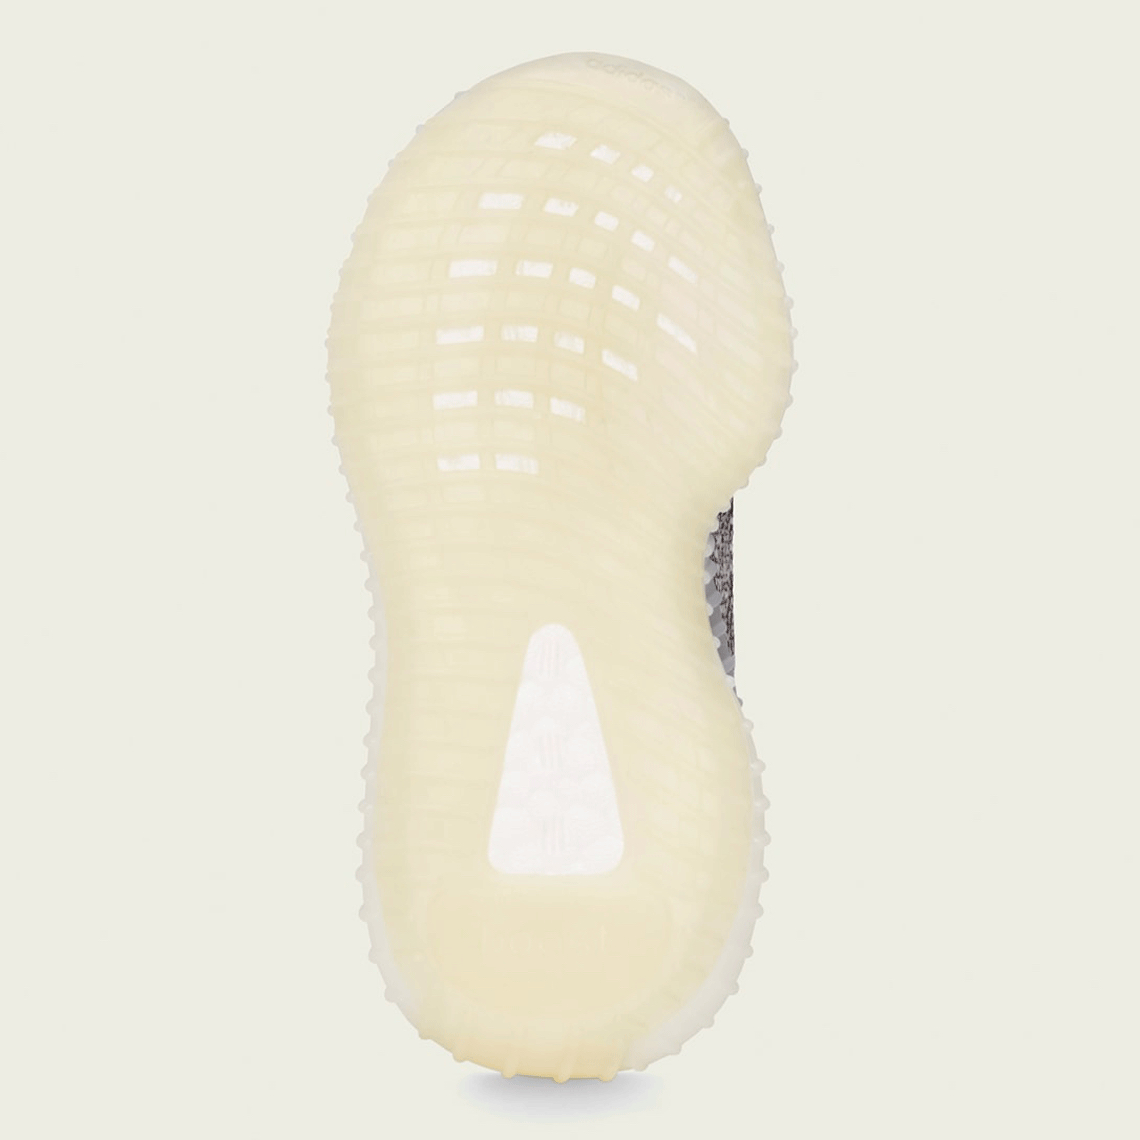 adidas Yeezy Boost 350 V2 Zyon Release Date | SneakerNews.com